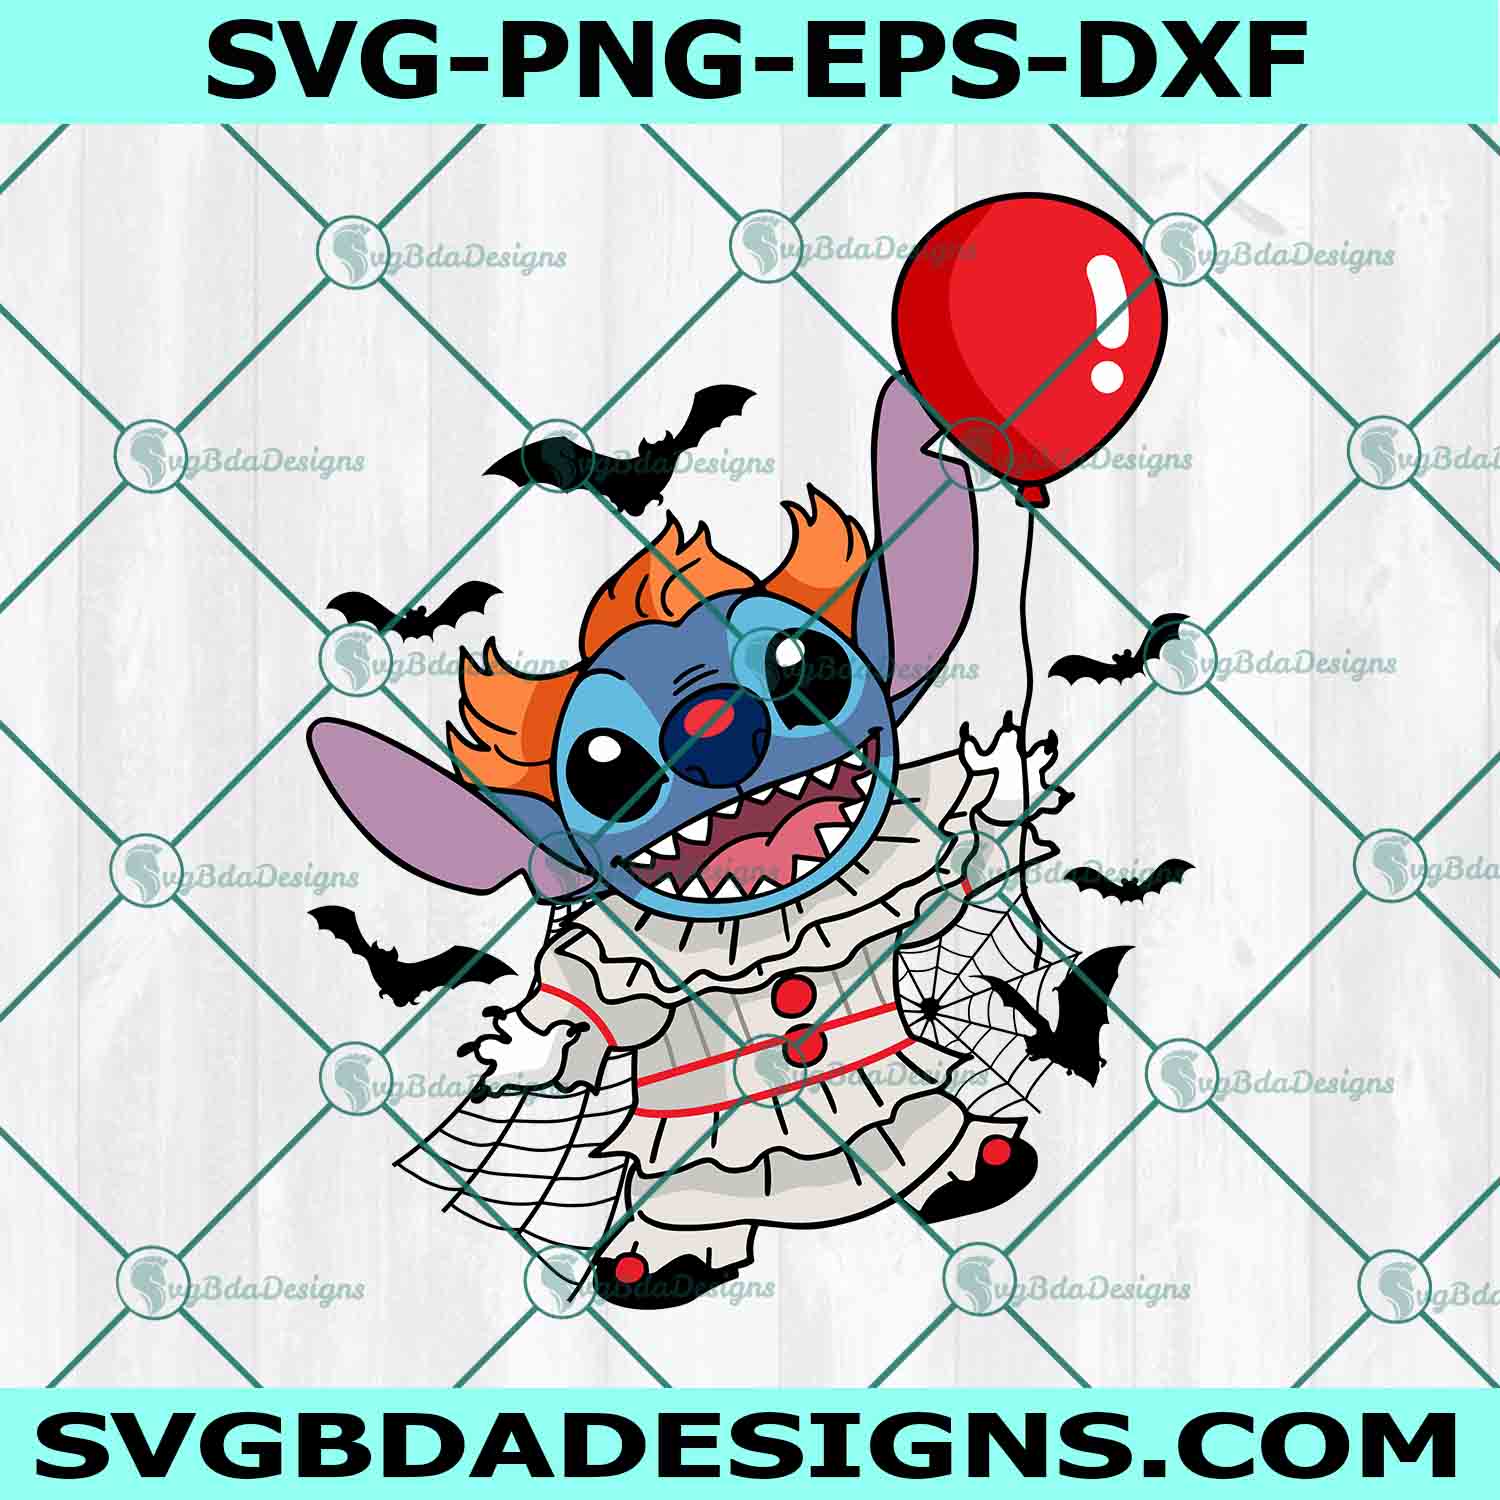 Stitch x Pennywise Clown Svg, Stitch Svg, Pennywise Clown Svg, Disney Halloween Svg, Horror Character Halloween Svg, File For Cricut